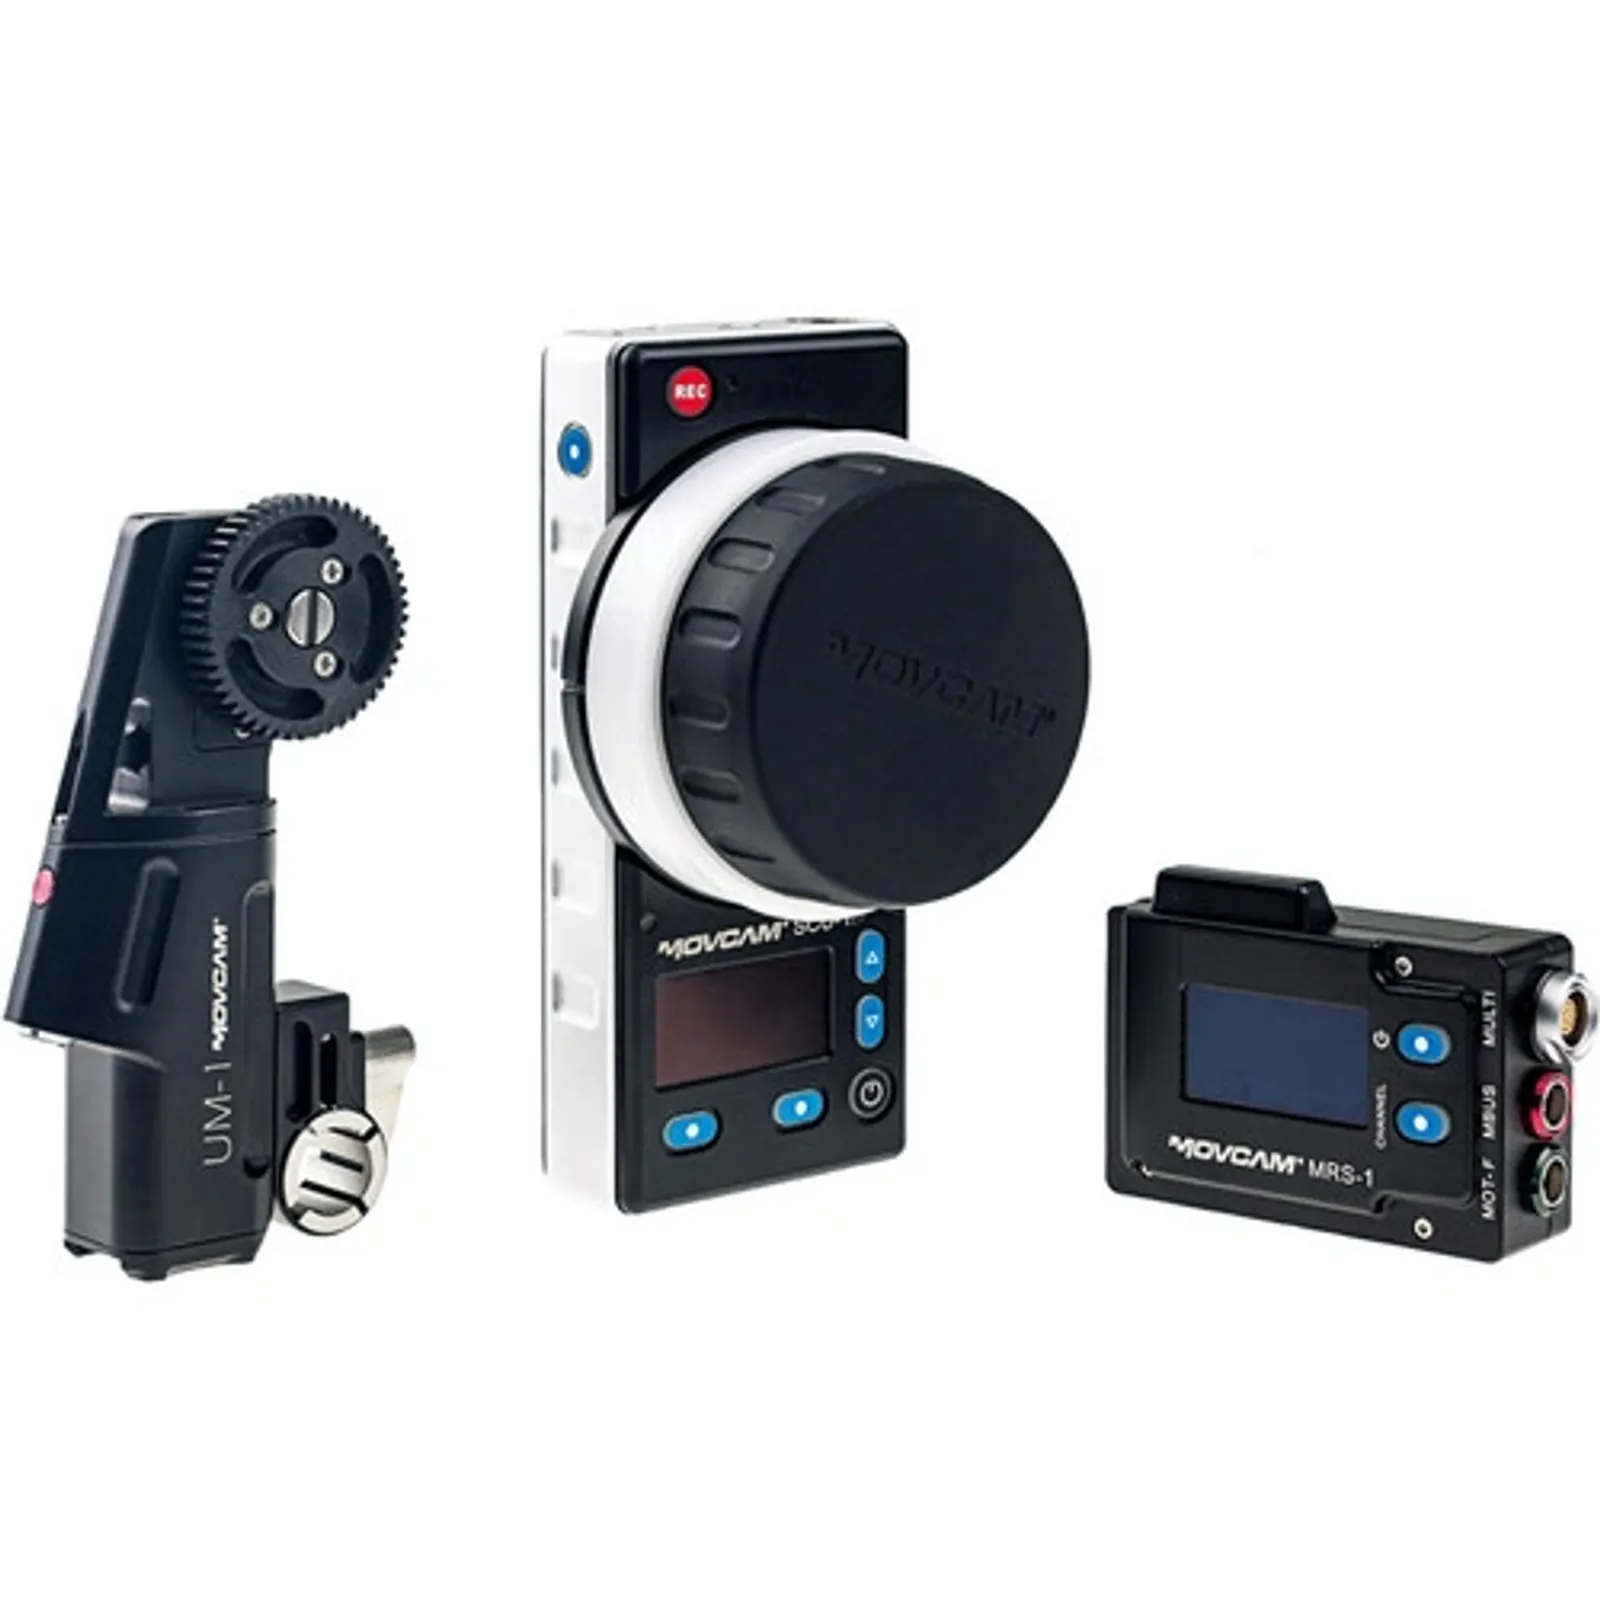 Movcam Single-Axis Wireless Lens Control System - Remote follow focus